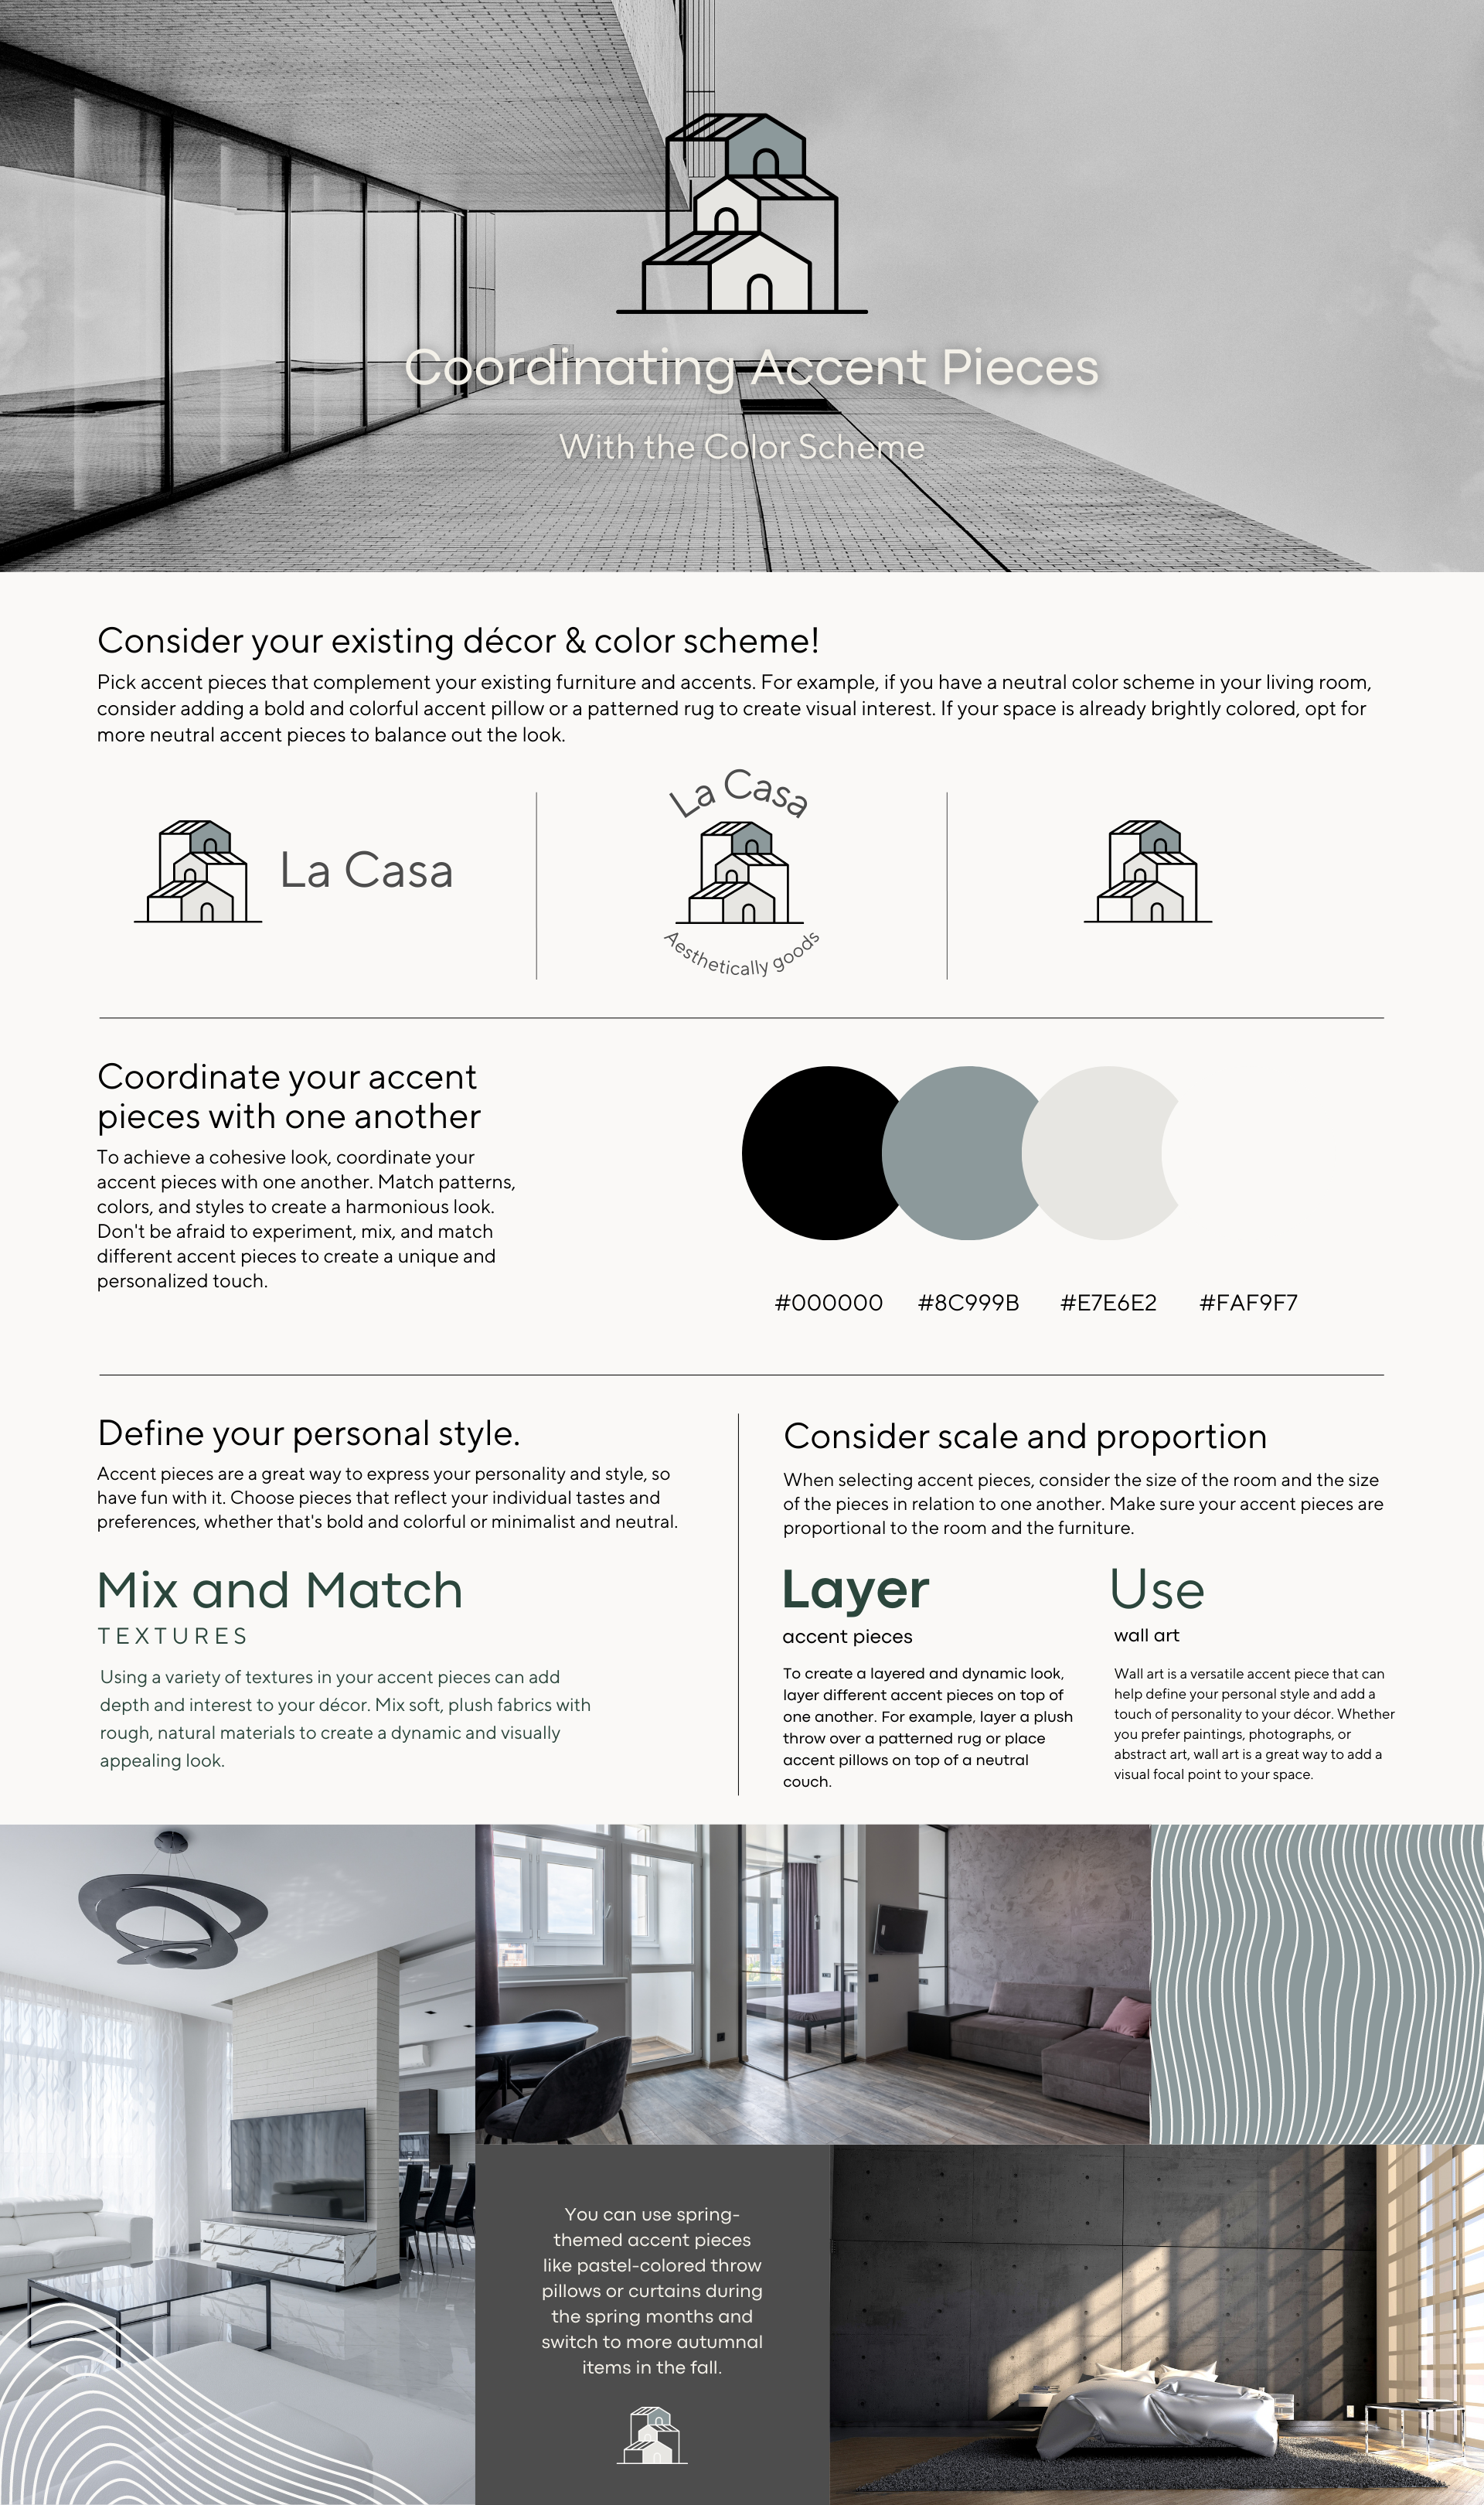 infographic on touch ups and accent pieces